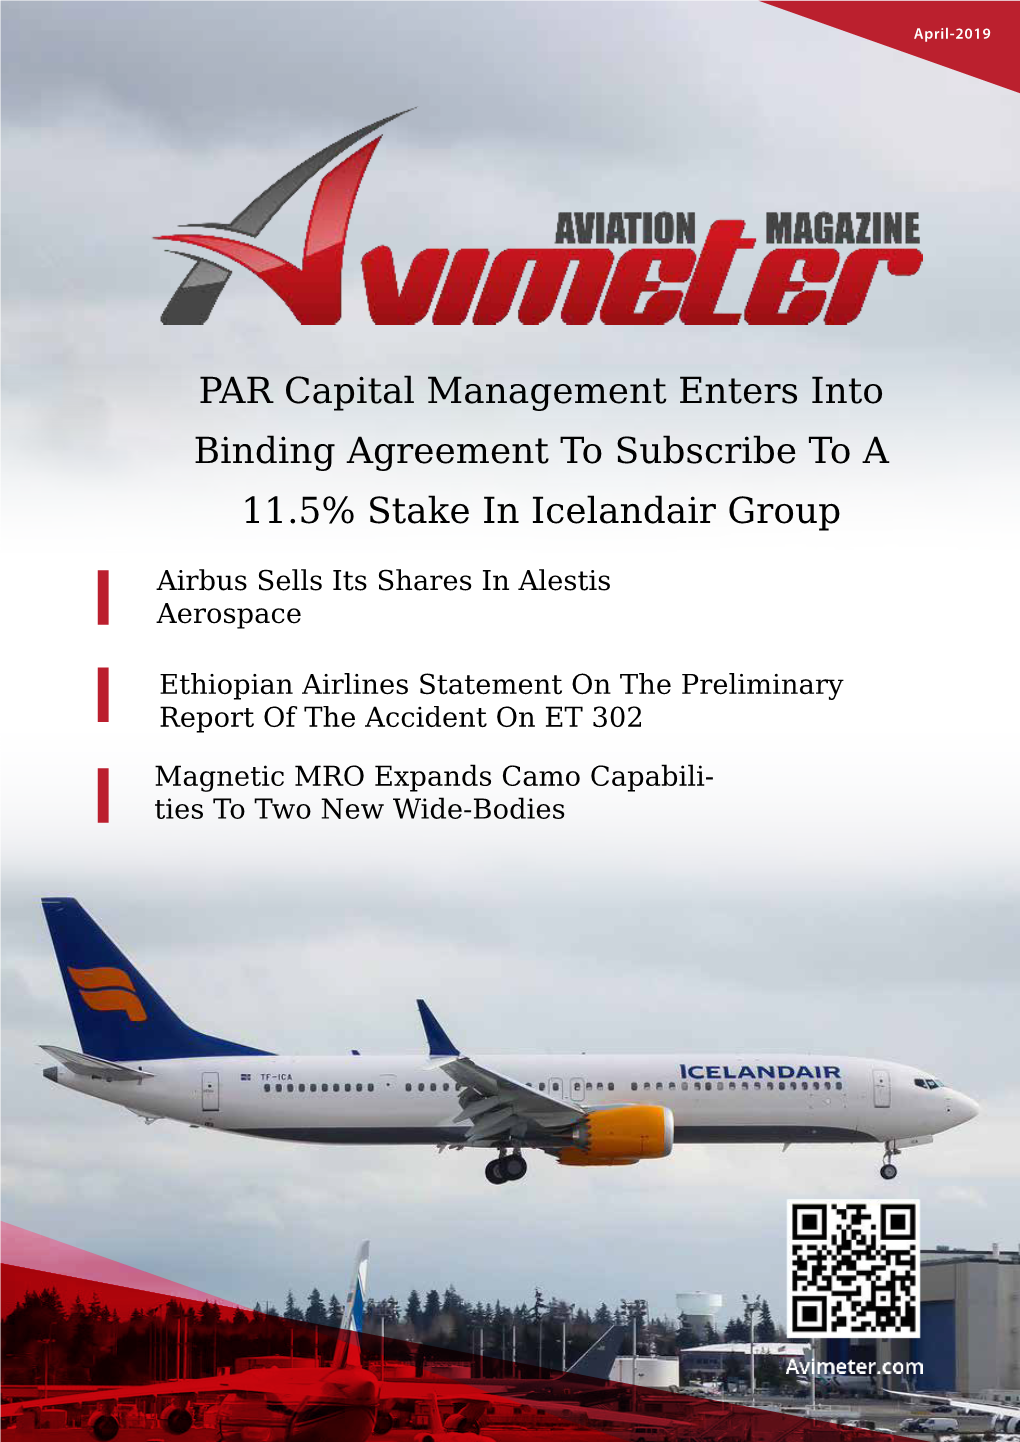 PAR Capital Management Enters Into Binding Agreement to Subscribe to a 11.5% Stake in Icelandair Group